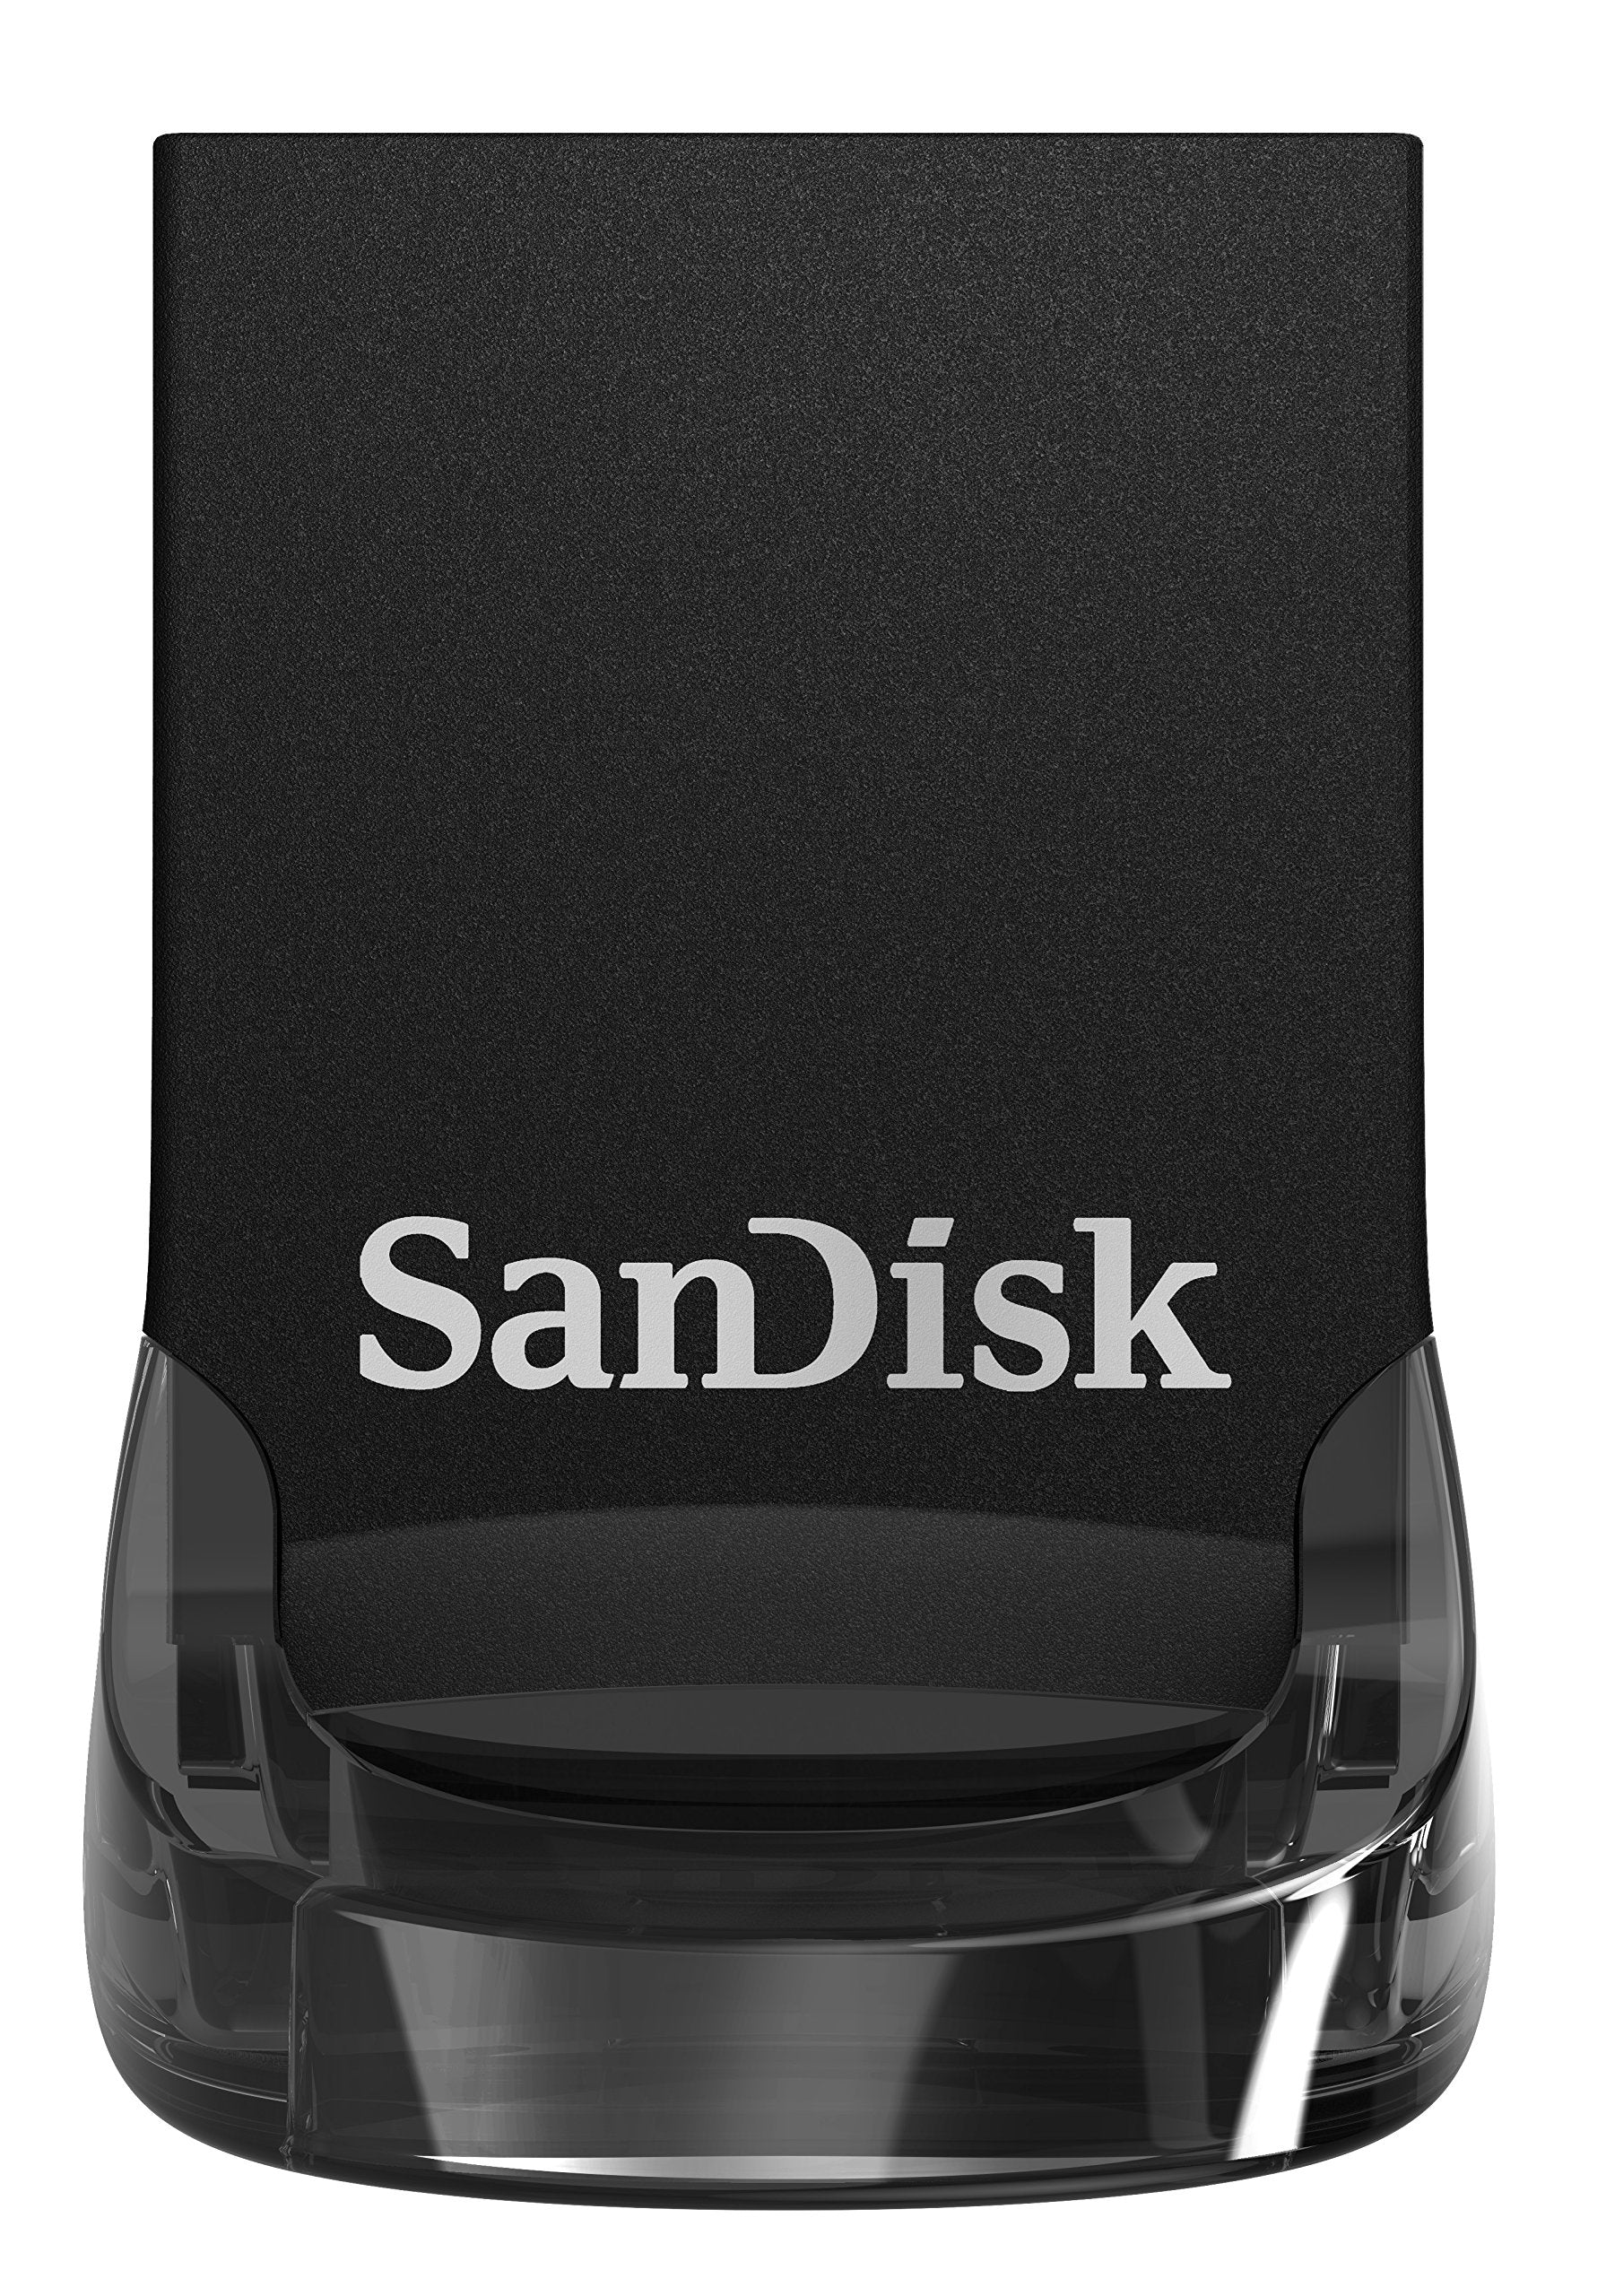 SanDisk Ultra Fit 32GB USB 3.1 Flash Drive up to 130MB/s read - Triple Pack